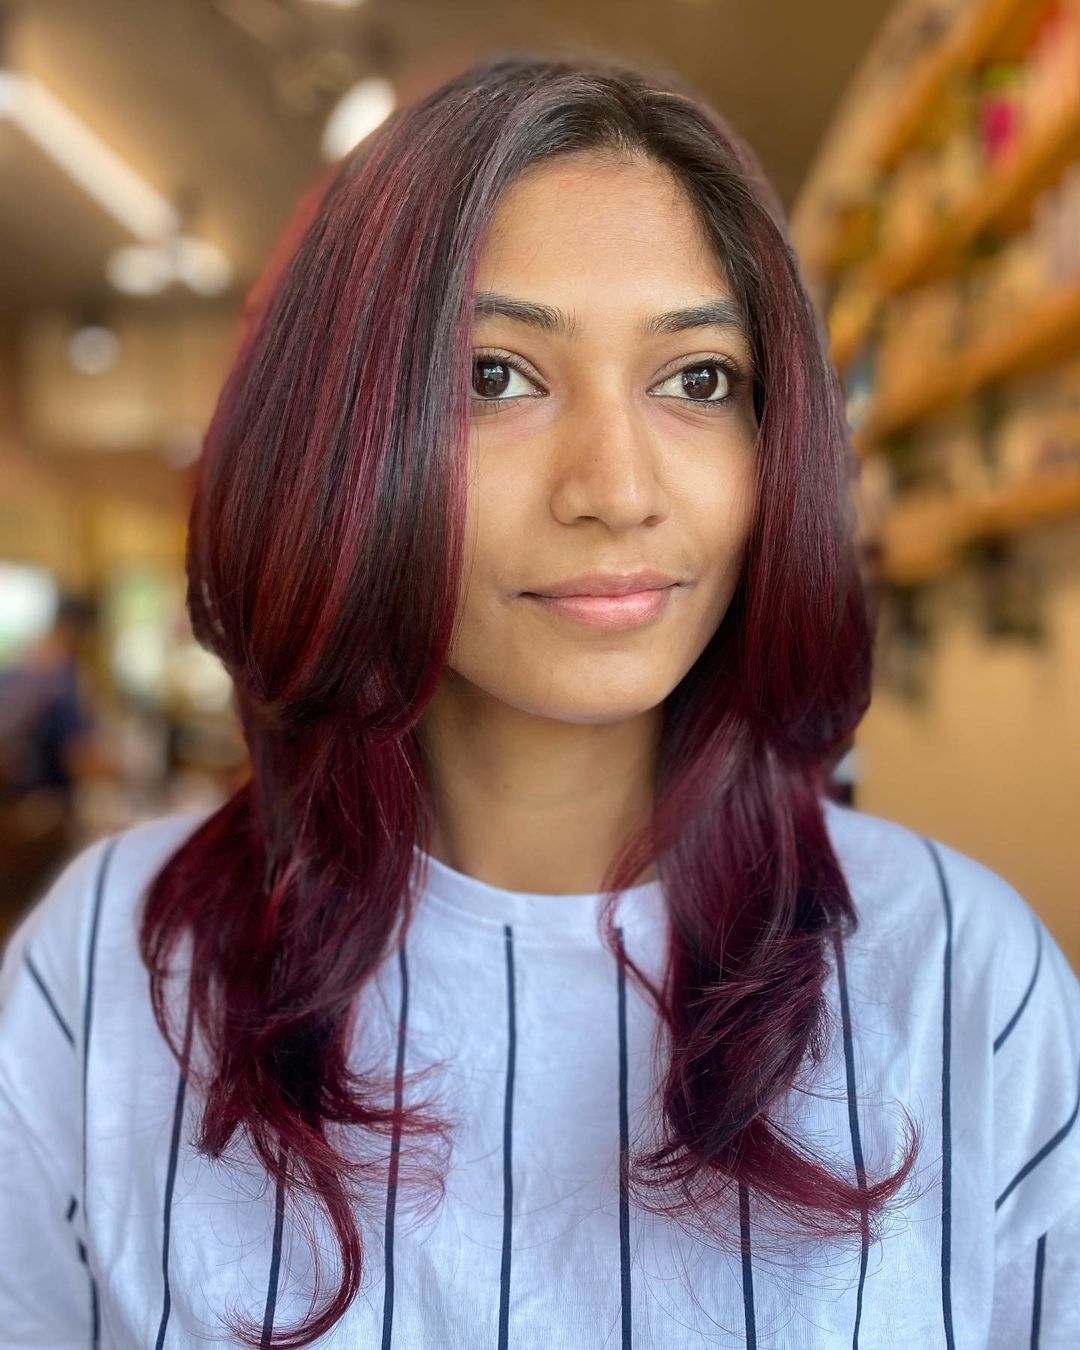 Hair Color for Indian Skin Tone 213 hair care routine | hair color | hair colors for Indian skin tone Hair Color for Indian Skin Tones